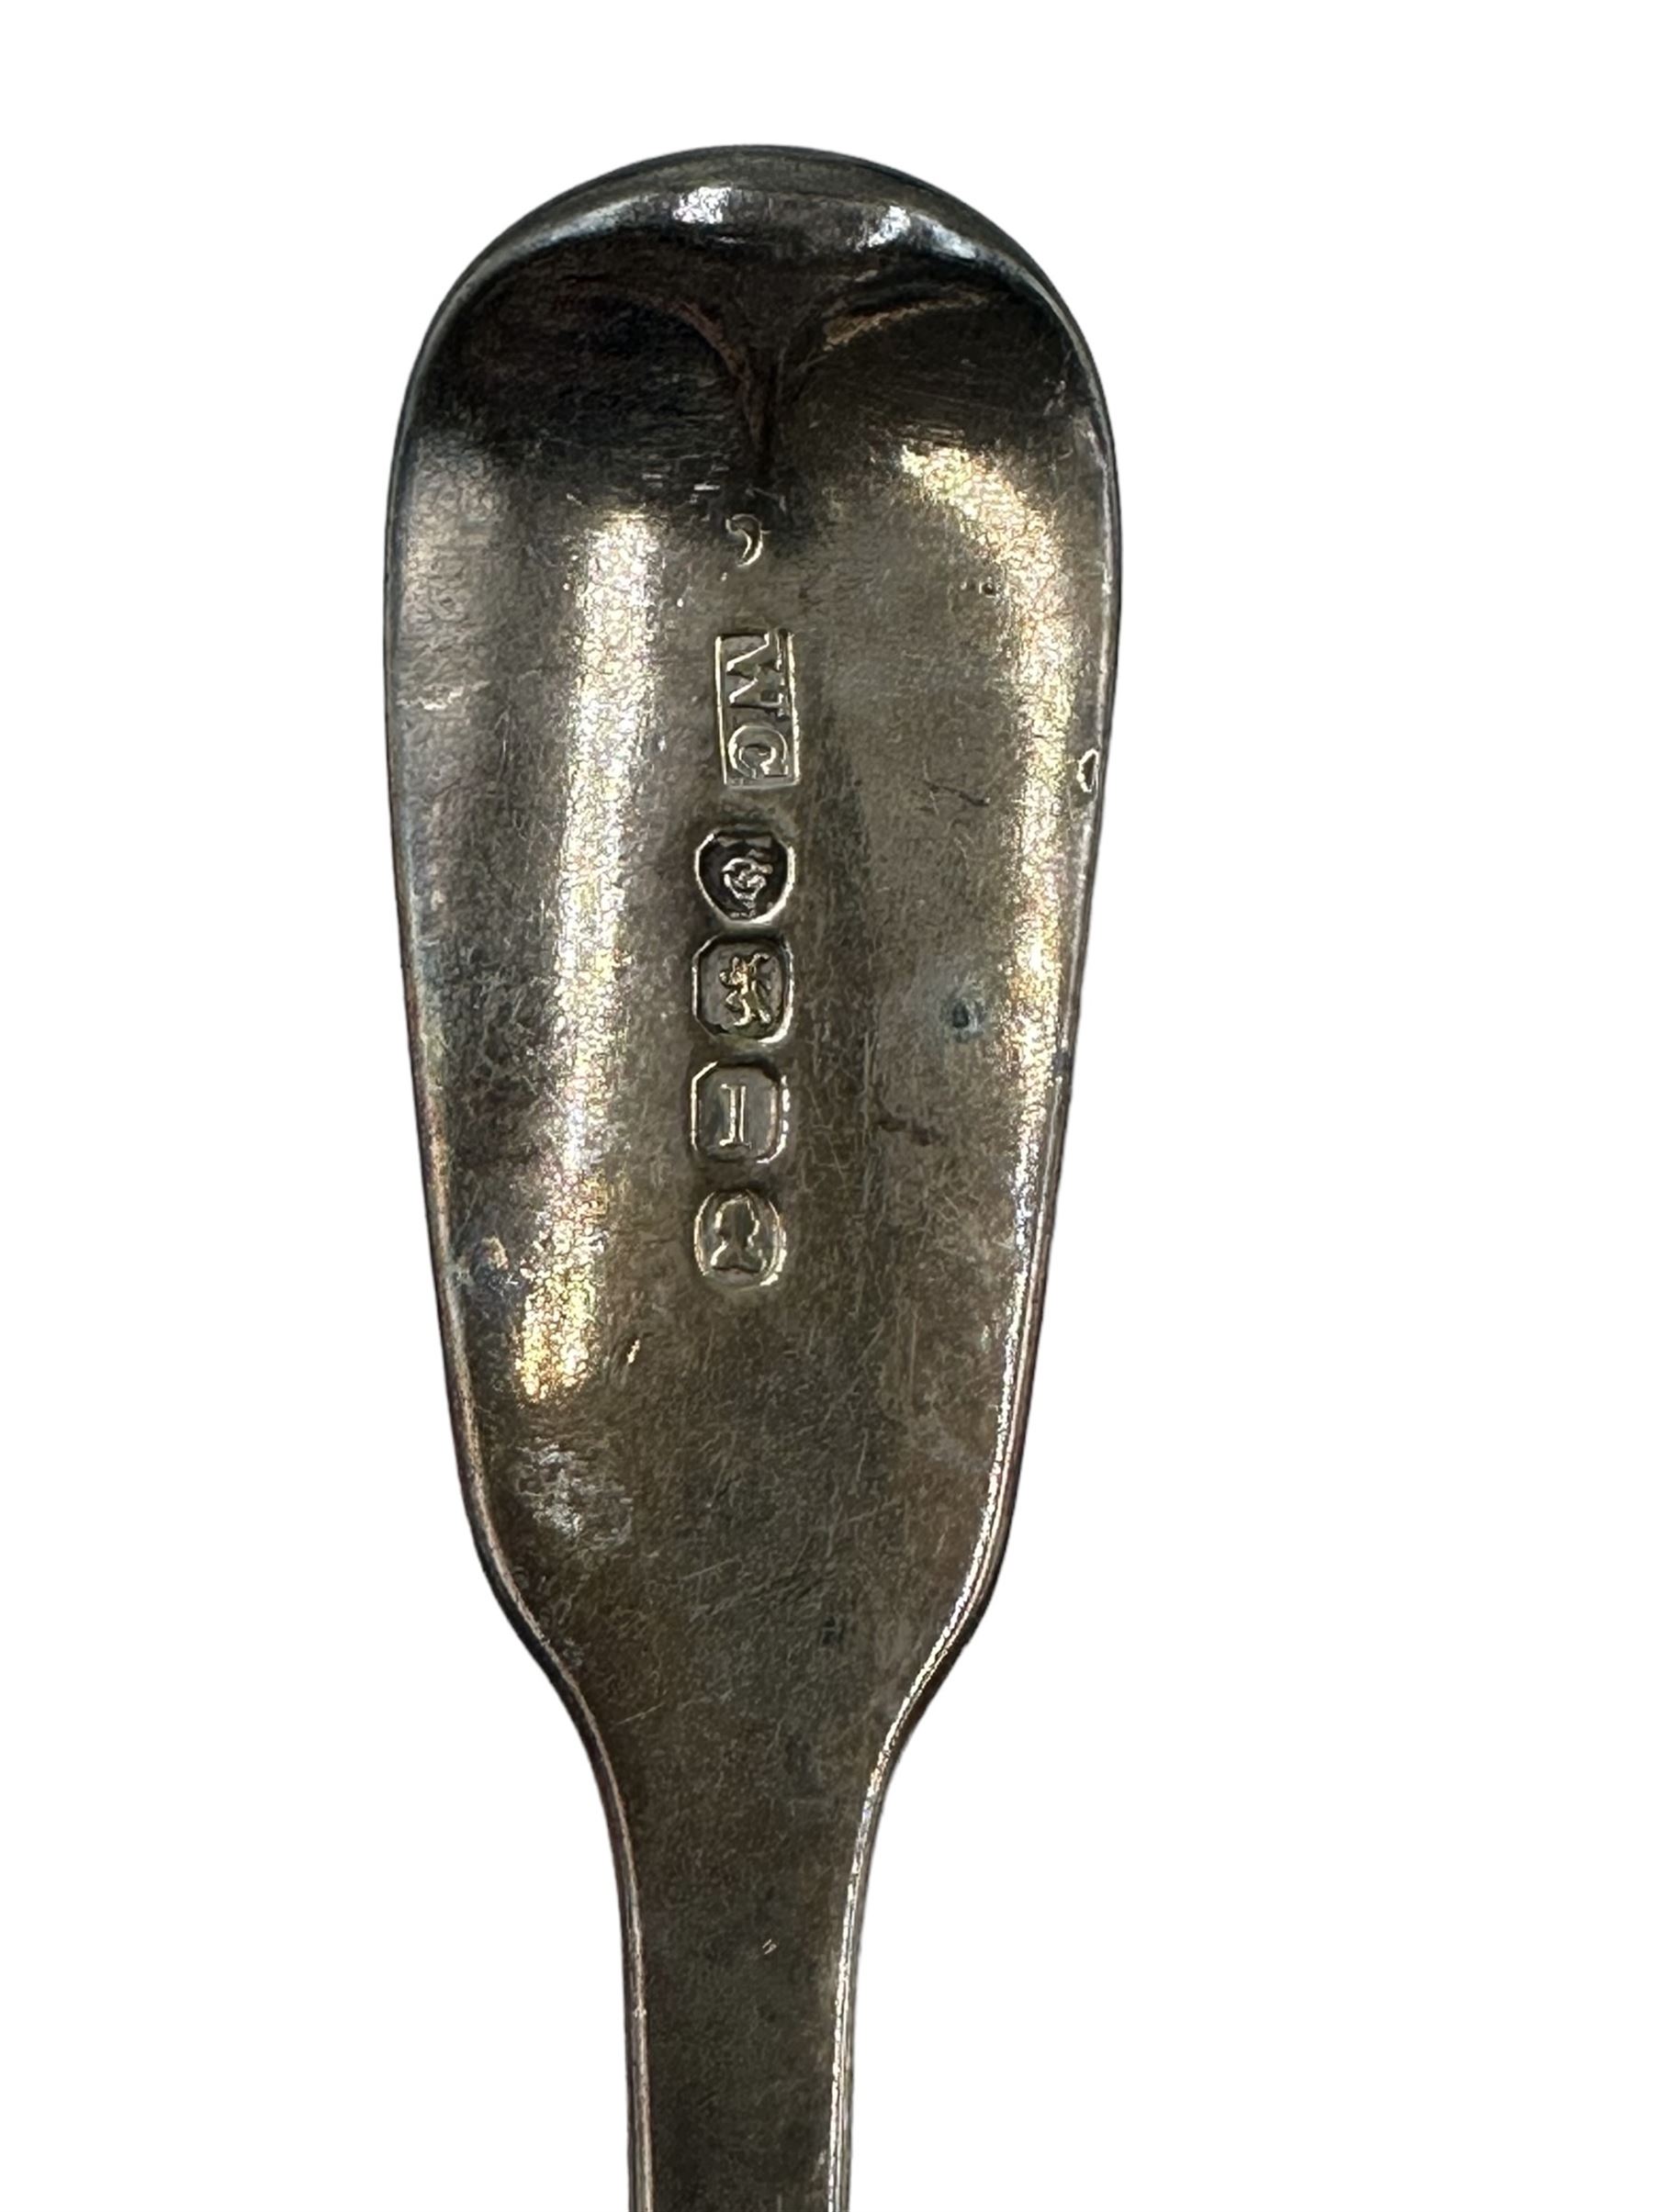 George IV silver fiddle pattern soup ladle engraved with initials London 1825 Maker William Chawner - Image 5 of 5